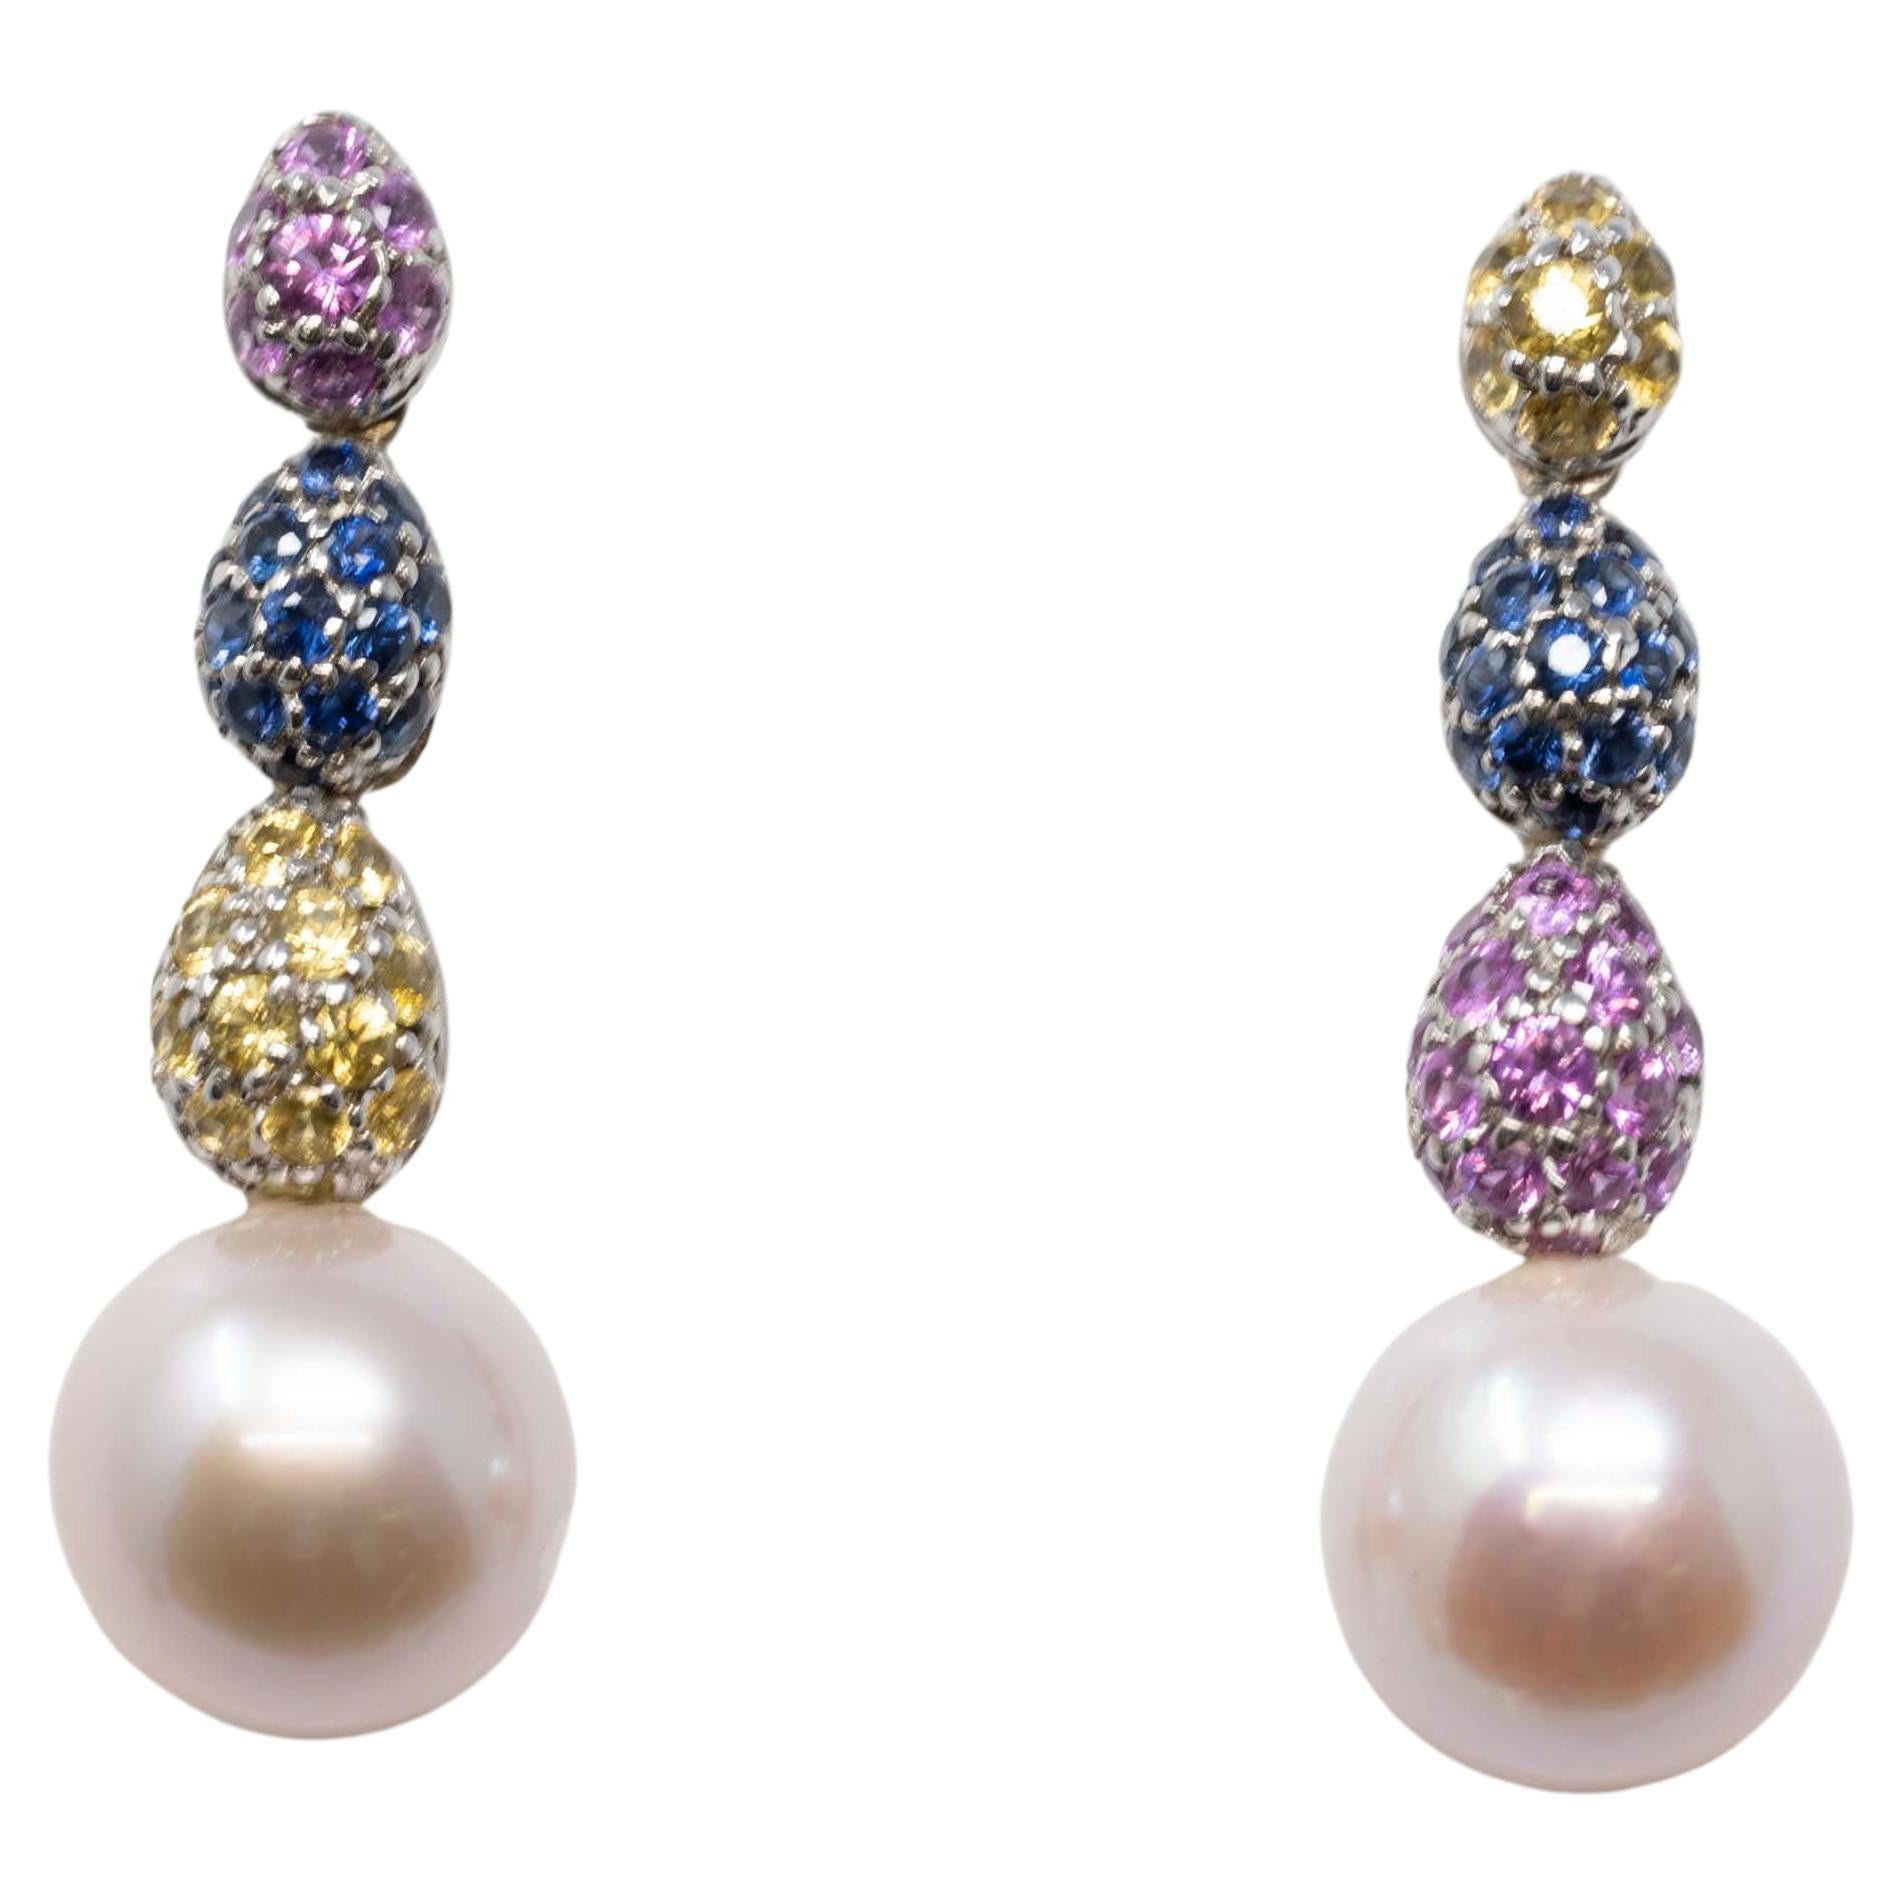 18k White Gold Earrings with 72 Corundum Sapphires